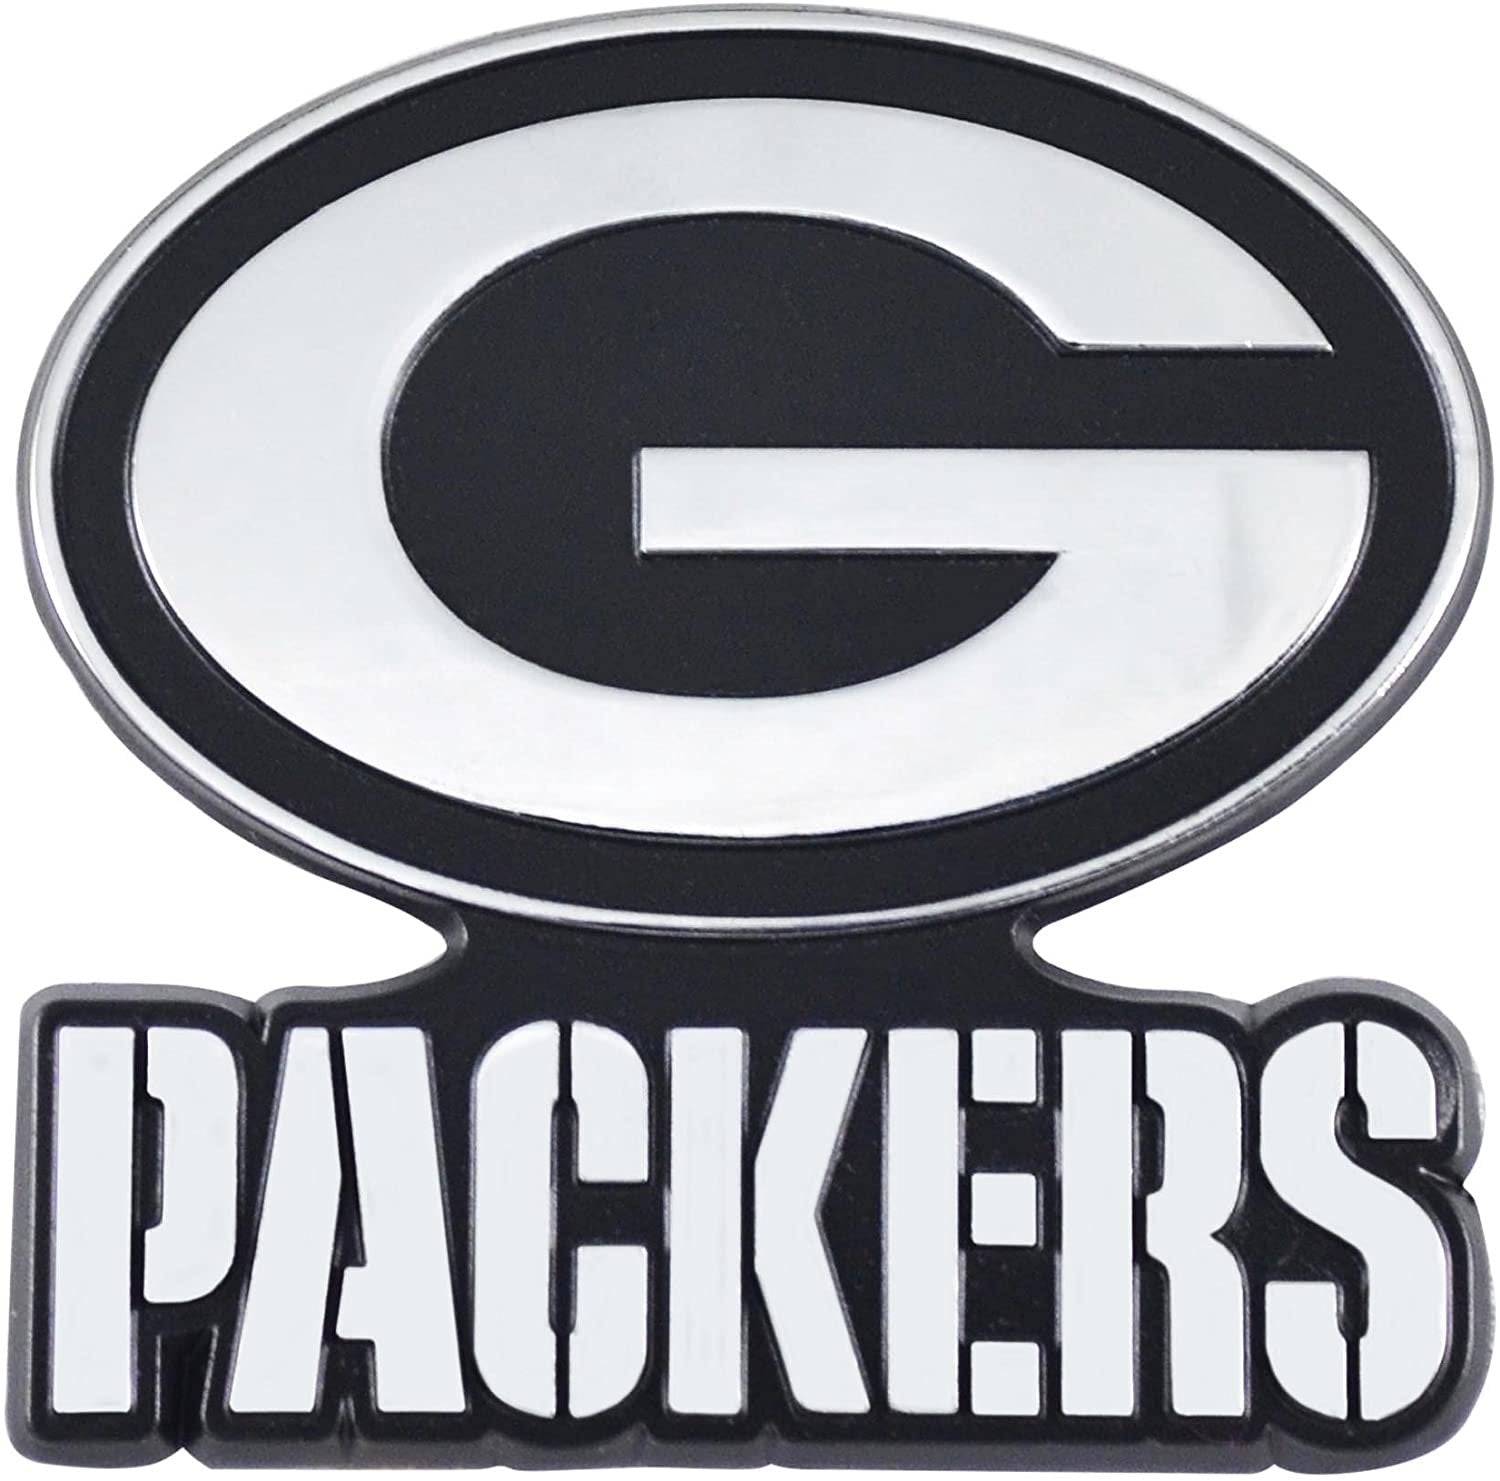 Green Bay Packers Solid Metal Raised Auto Emblem Decal Adhesive Backing